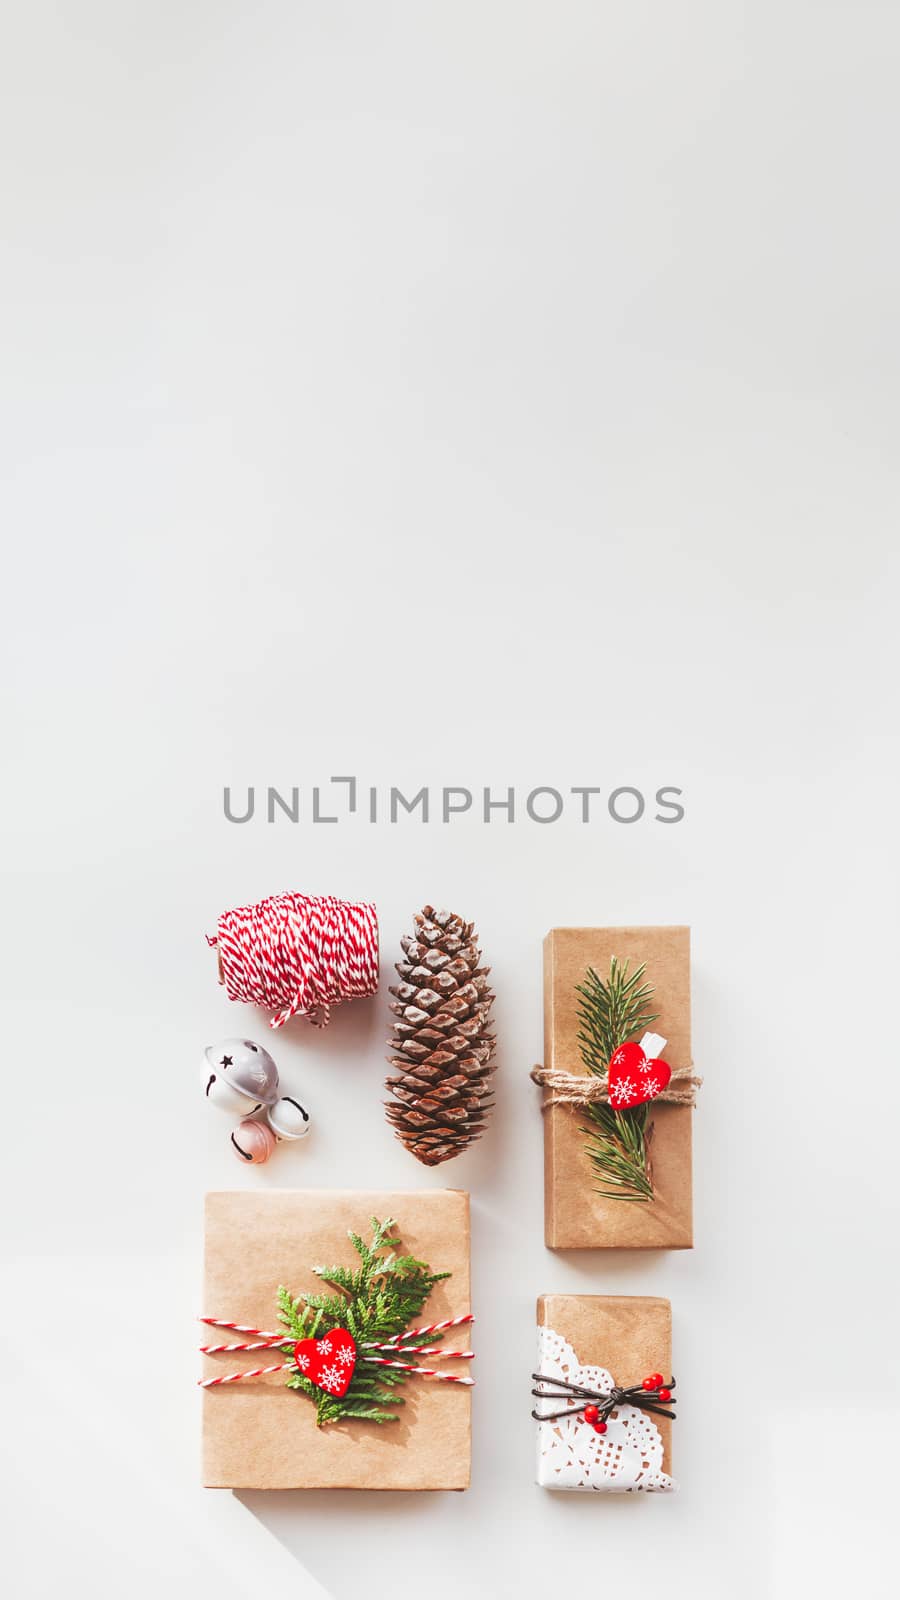 Christmas DIY presents wrapped in craft paper with fir tree twigs and red hearts. Top view on decorations on New Year gifts. Festive background. Winter holiday spirit. Banner with copy space.